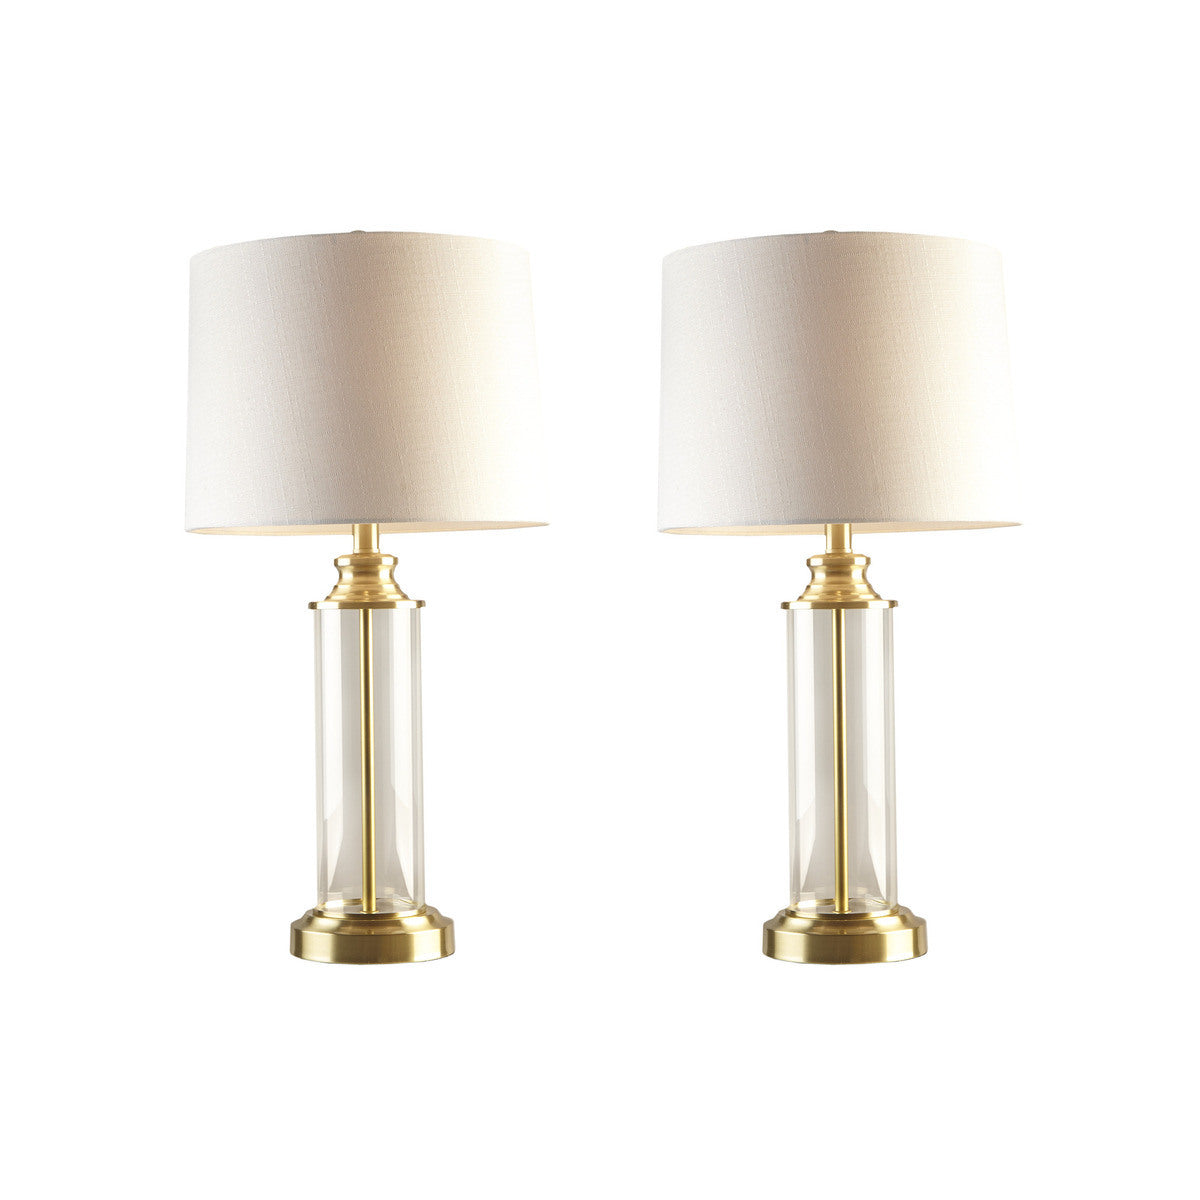 A|M Lighting Clarity Glass Cylinder Table Lamp Set of 2